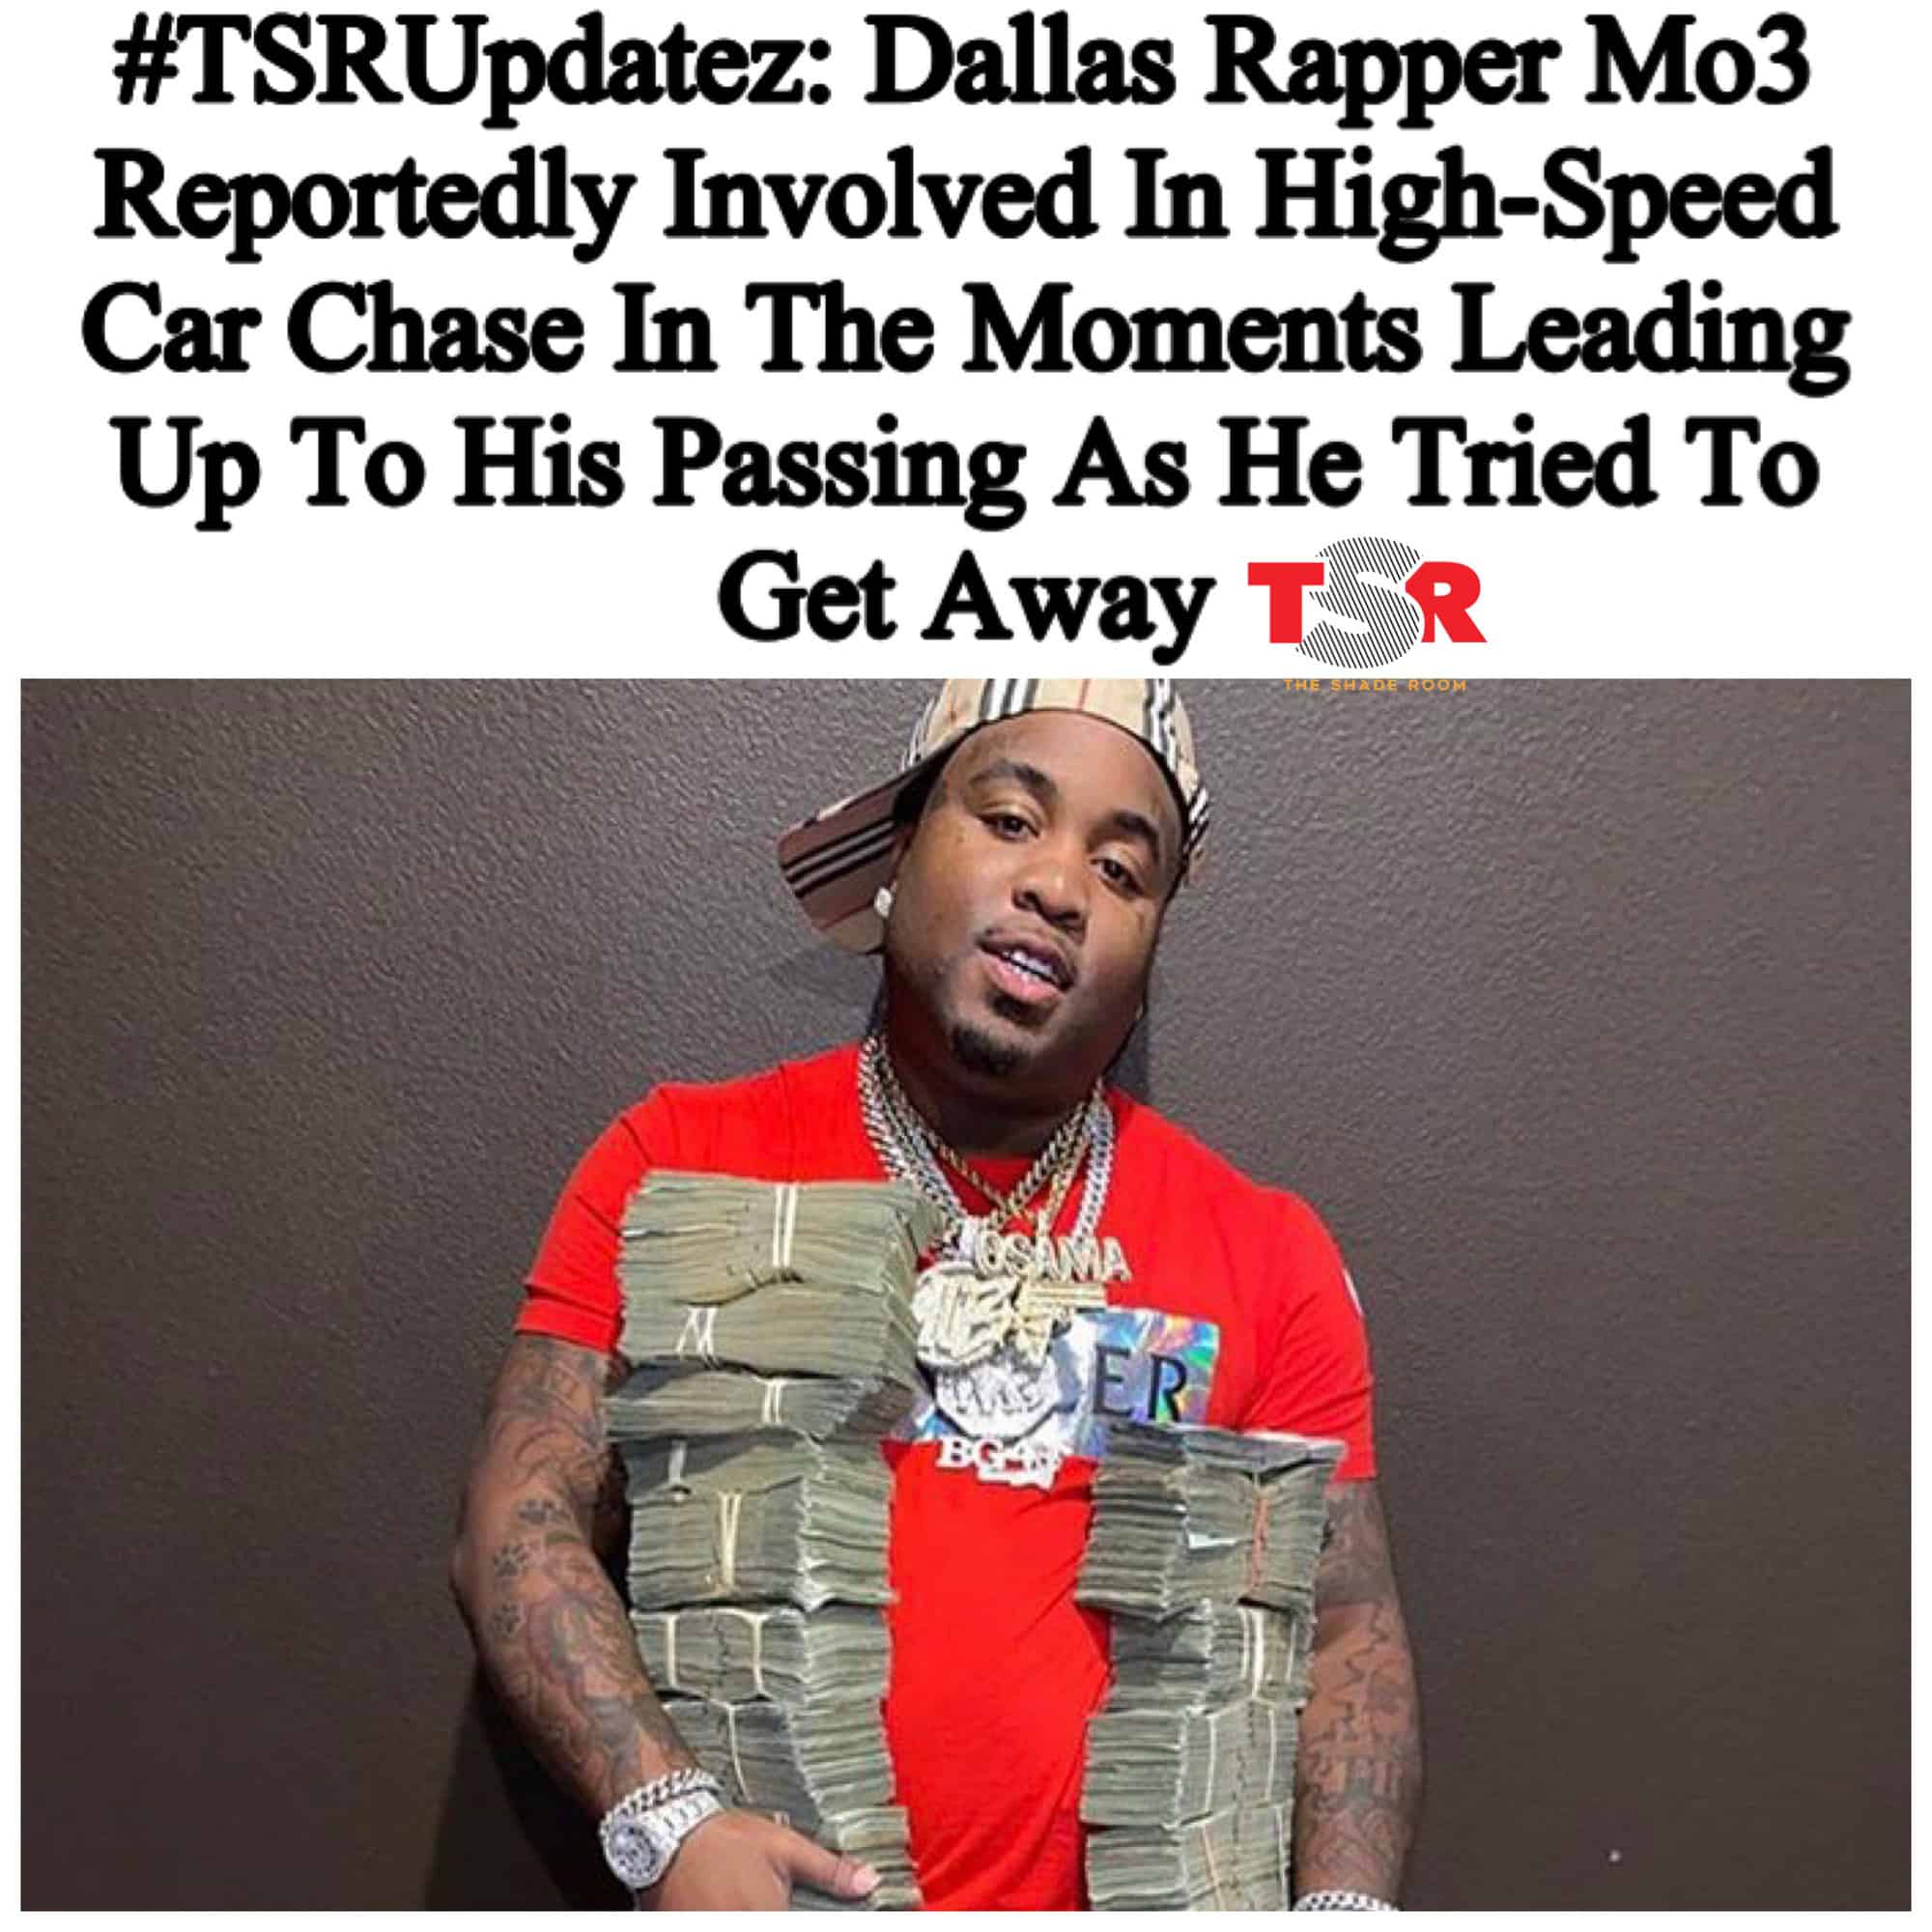 Dallas Rapper Mo3 Reportedly Involved In High-Speed Car Chase In The Moments Leading Up To His Passing As He Tried To Get Away